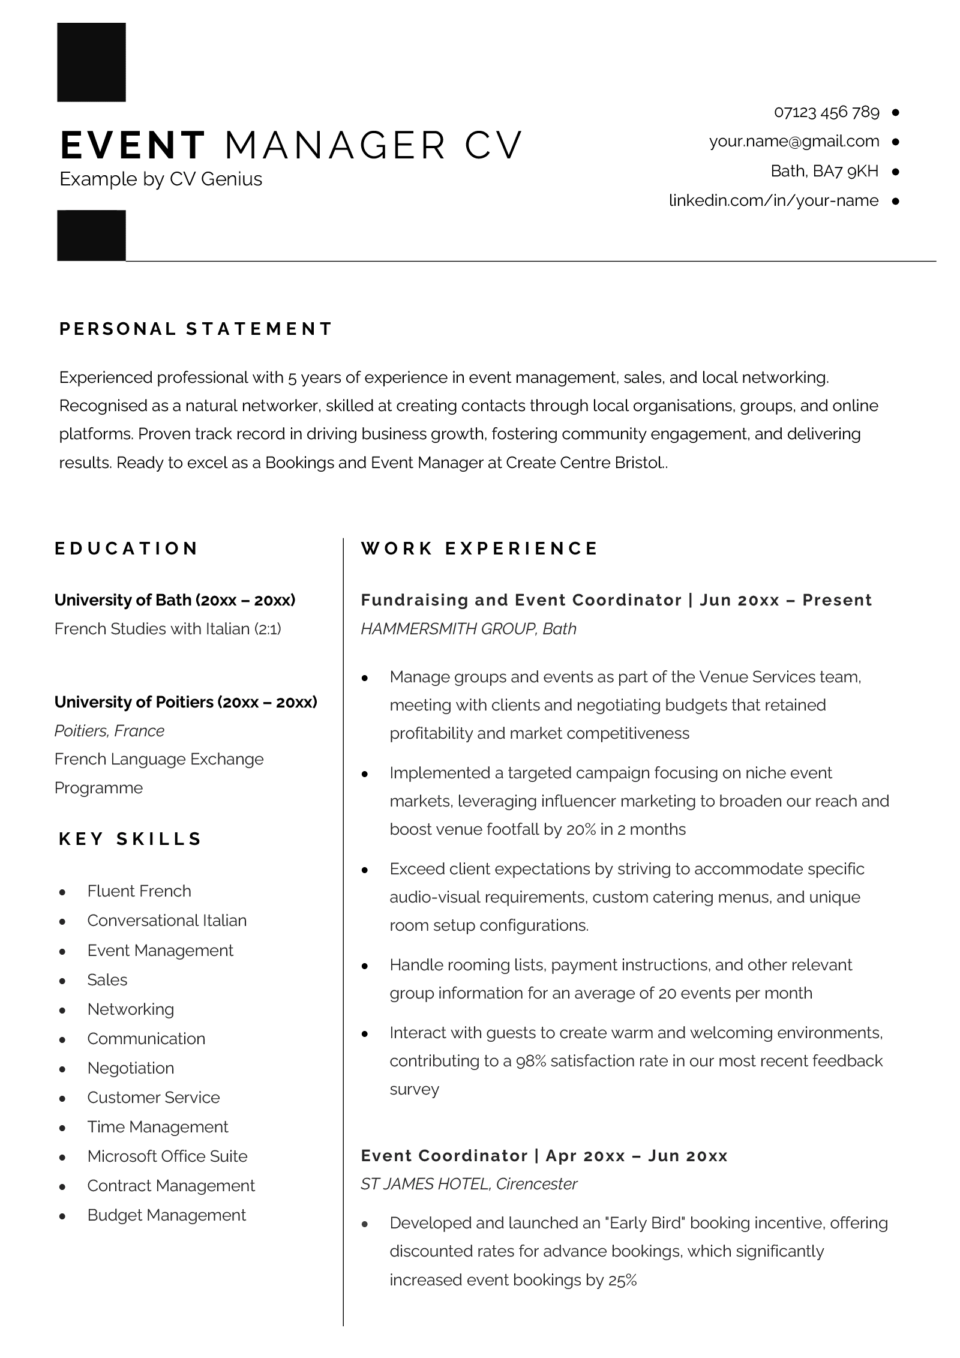 An event manager CV example with a large editorial header and the applicant's skills, education, and work experience arranged into two columns.